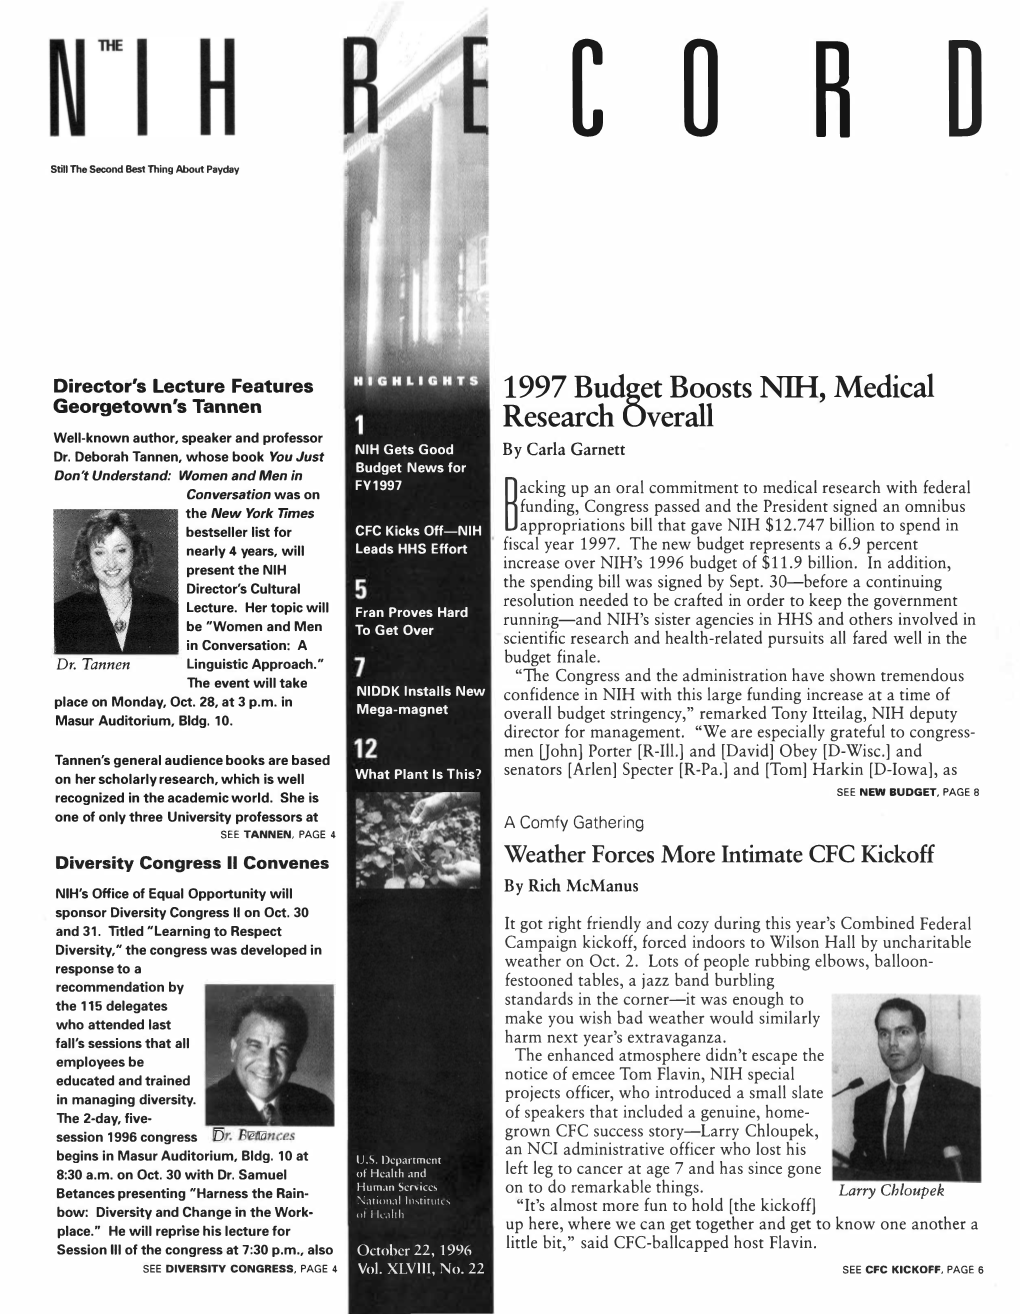 1997 Budget Boosts NIH, Medical Research Overall